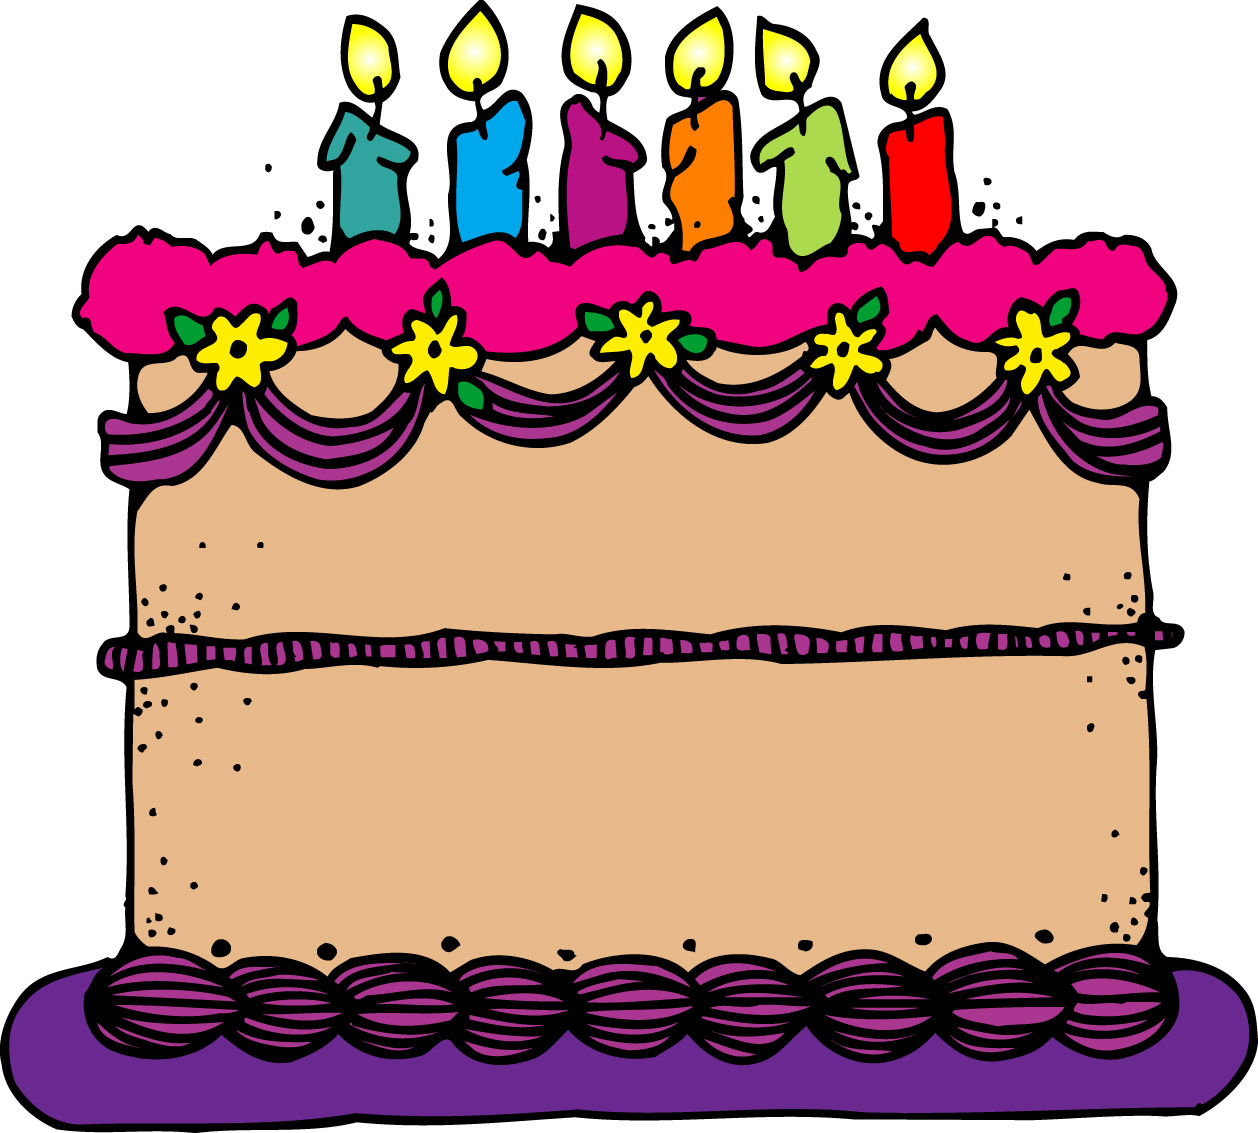 Free Clipart Images Happy Birthday - ClipArt Best